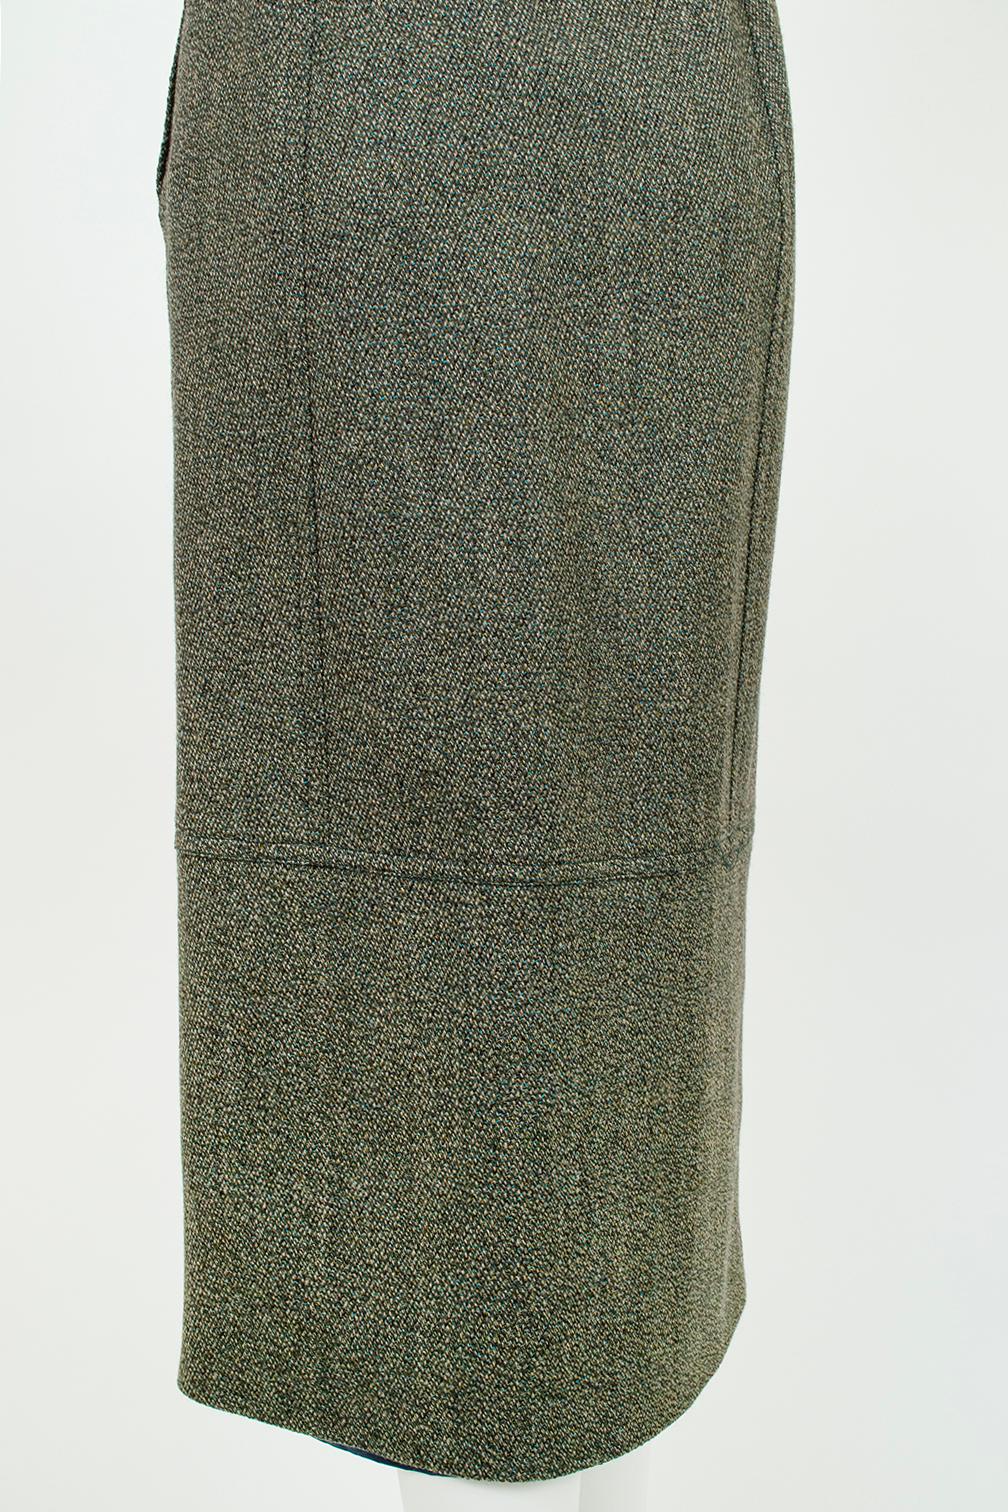 Ideal with a silk blouse and pumps for a business meeting or tall boots and a chunky sweater for weekends, this intricately woven tweed skirt is truly a day-to-evening workhorse. Rich with flecks of teal, camel and even lime, it can be paired with a